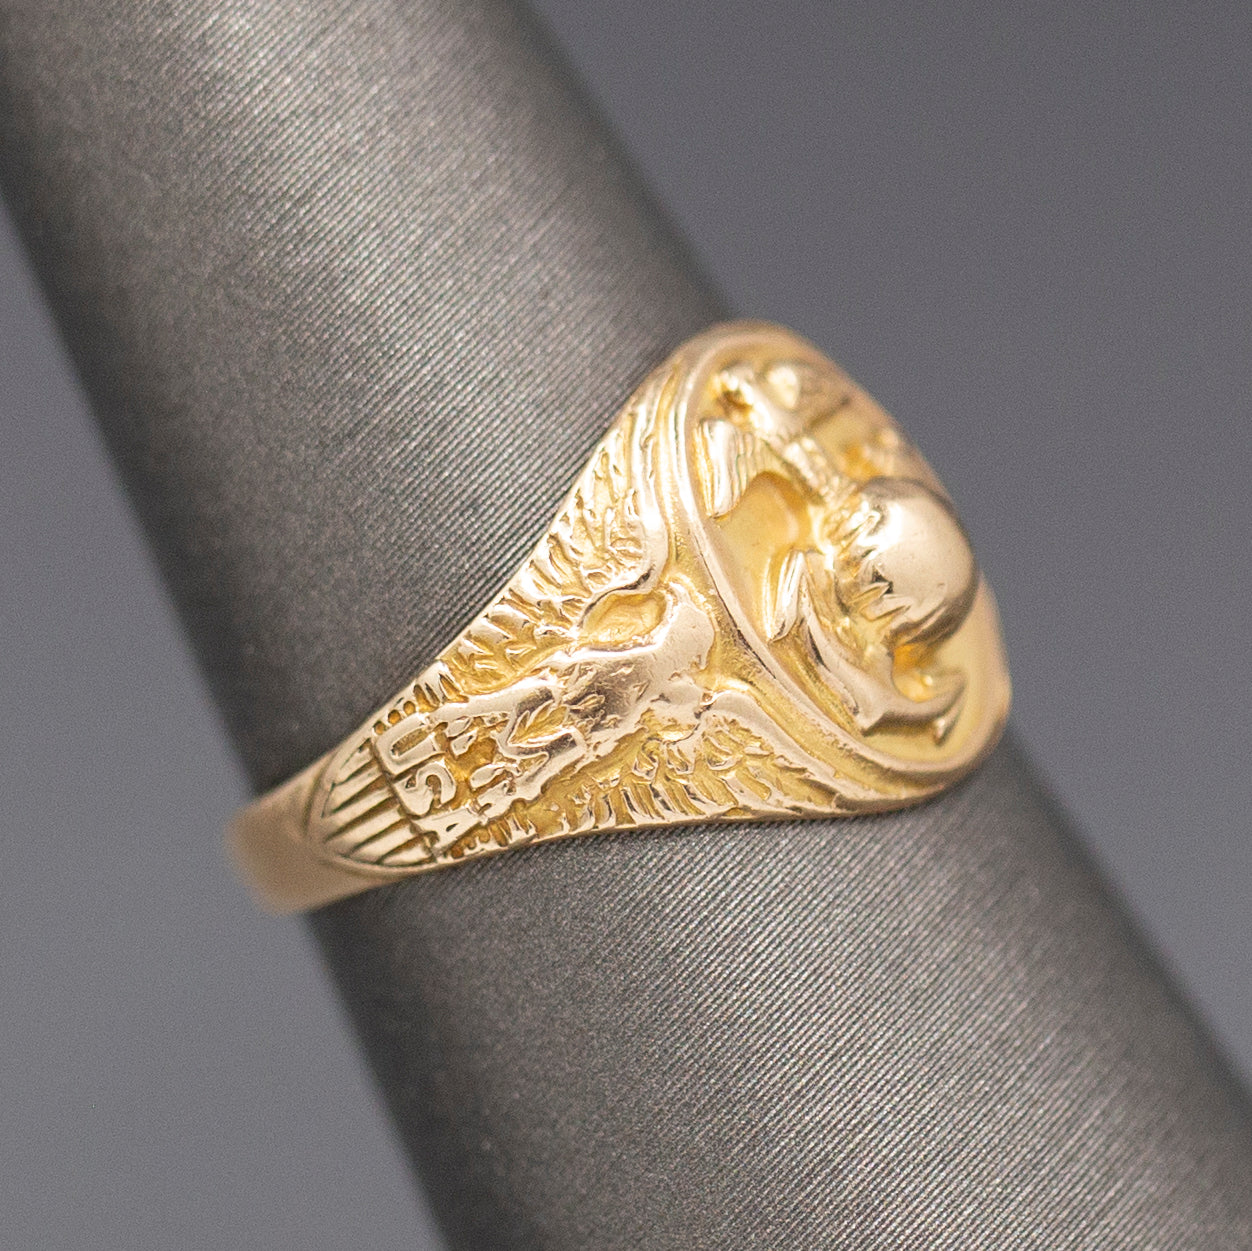 Antique 1910 United States Marines Signet Ring in 10k Yellow Gold